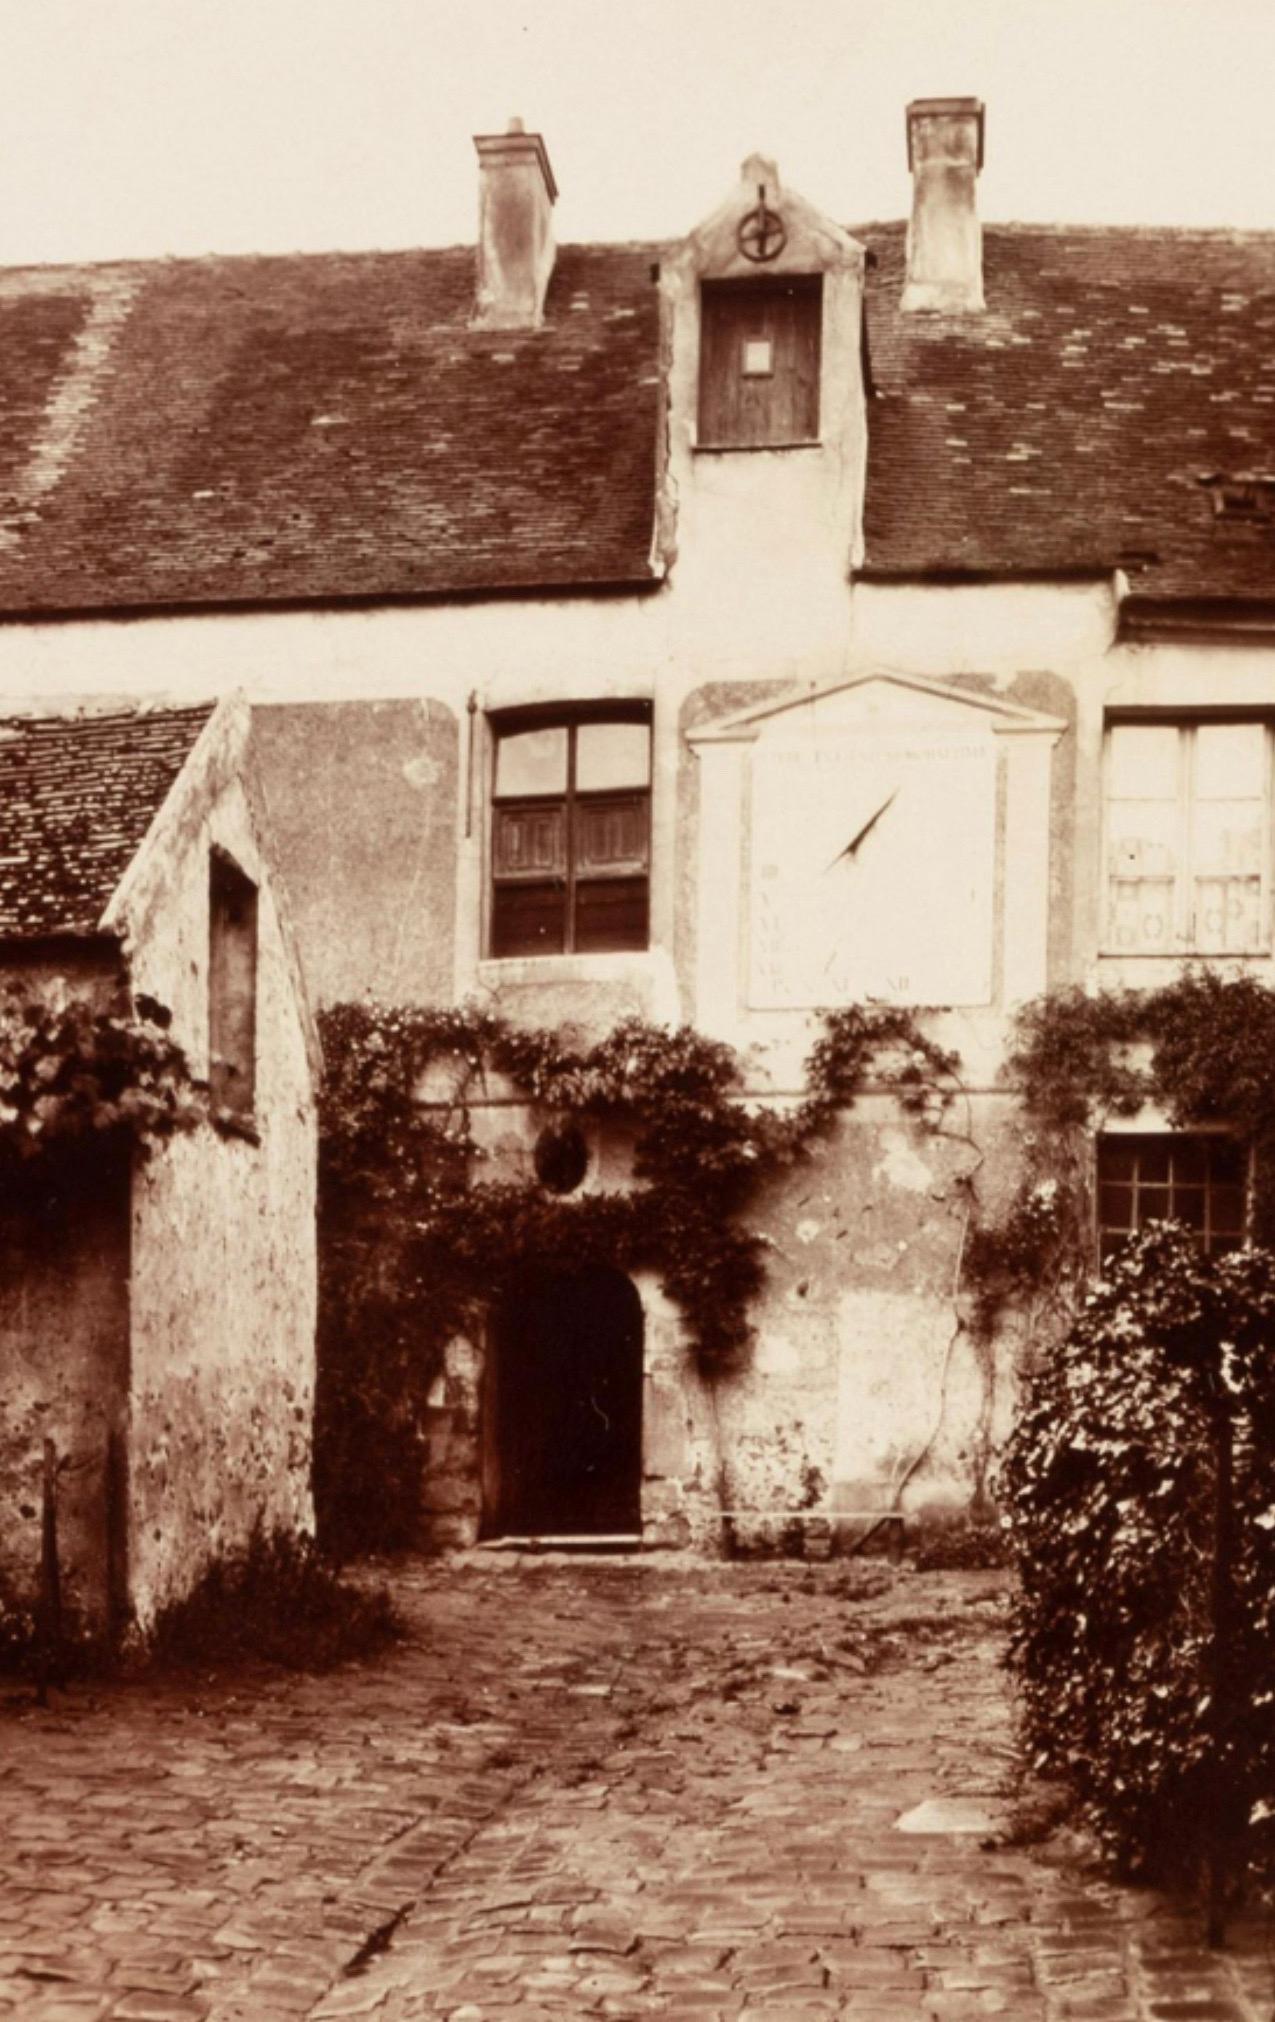 Eugene Atget (French, 1857-1927) Verrieres, vieux logis, 1922. Albumen silver print. printing out paper print from glass negative. verso right side stamped 'E. Atget / Rue[?]' verso left edge reading vertically printed in pencil 'Verrieres / Vieux